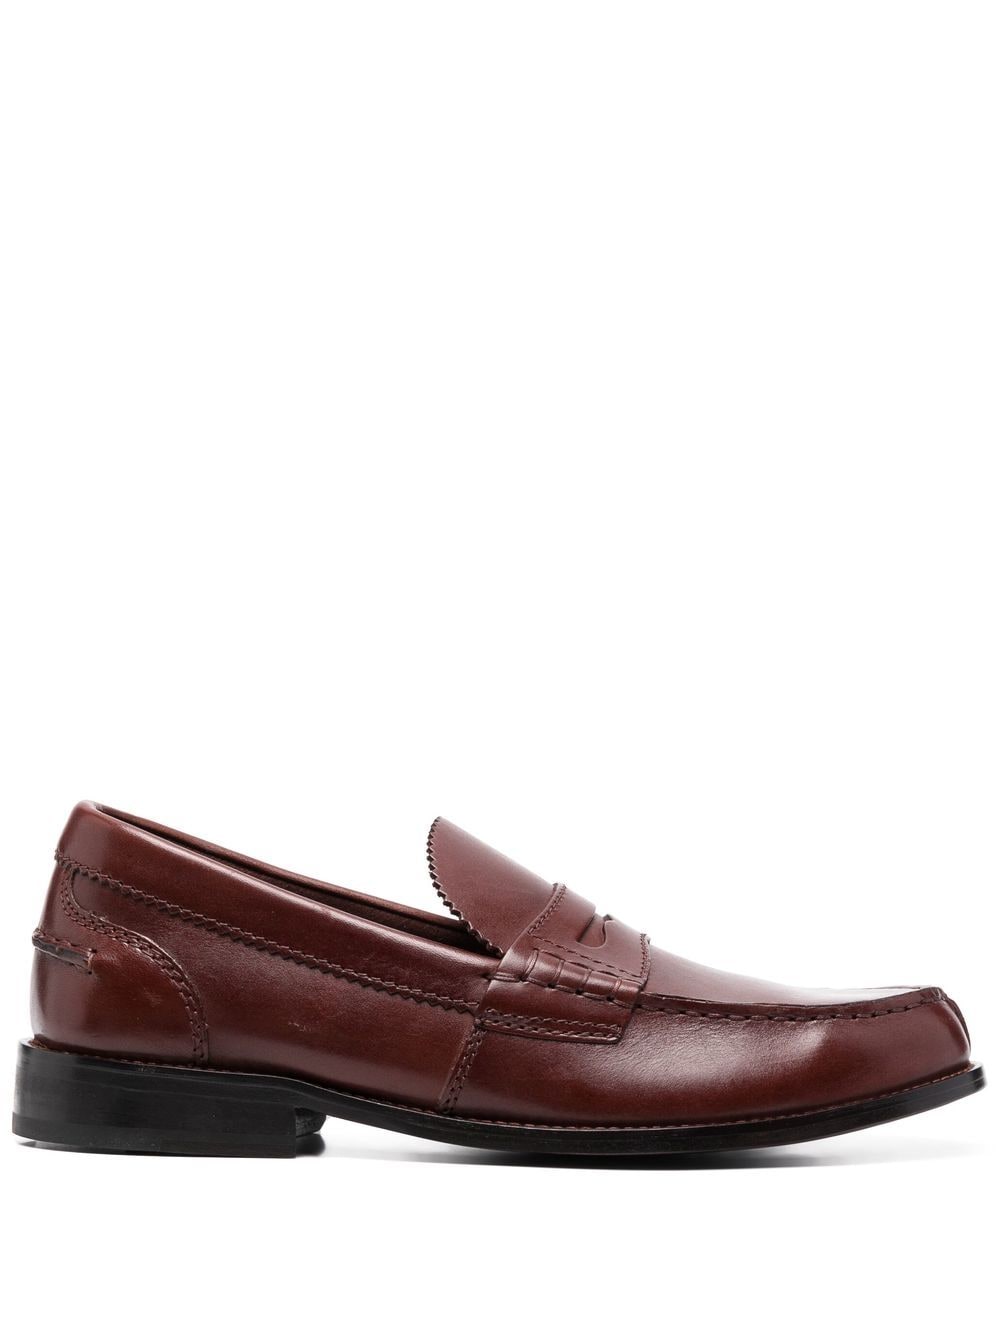 Clarks Originals Beary Slip-on Loafers In Brown